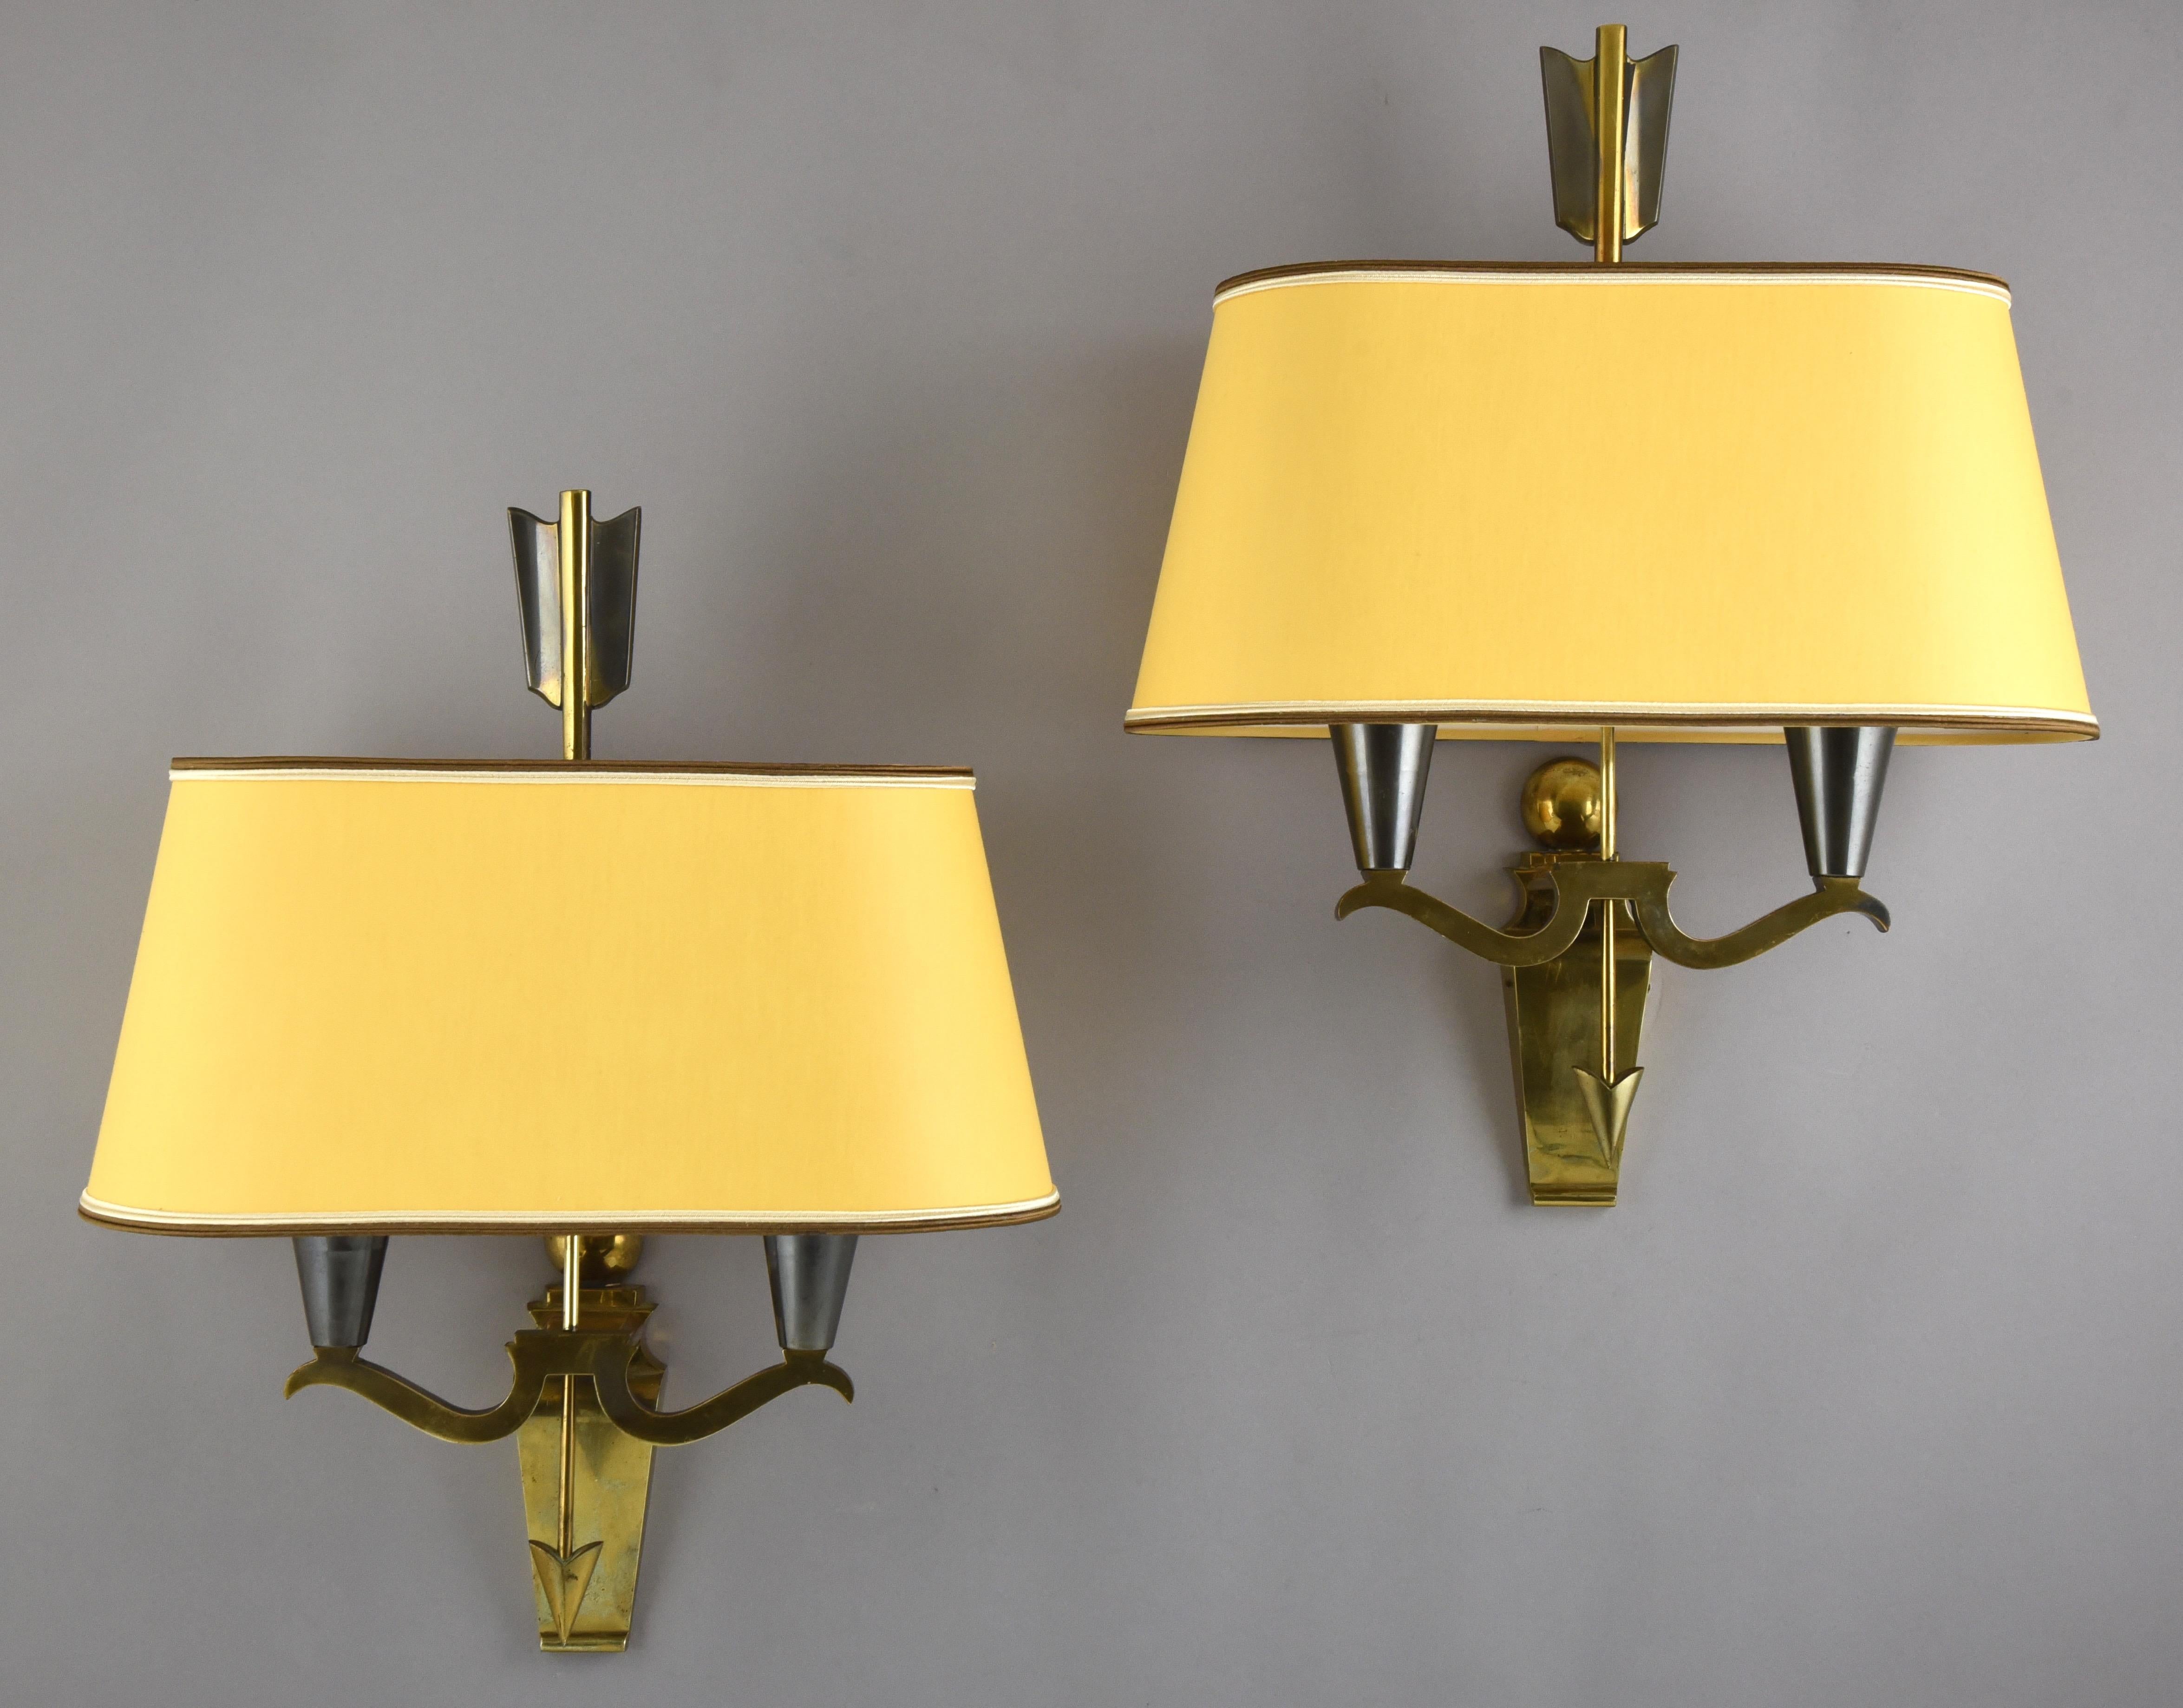 Stylish pair of midcentury arrow wall lights or sconces.
Patinated bronze frame with arrow, warm yellow fabric shades.
In the style of Maison Jansen, France circa 1960.